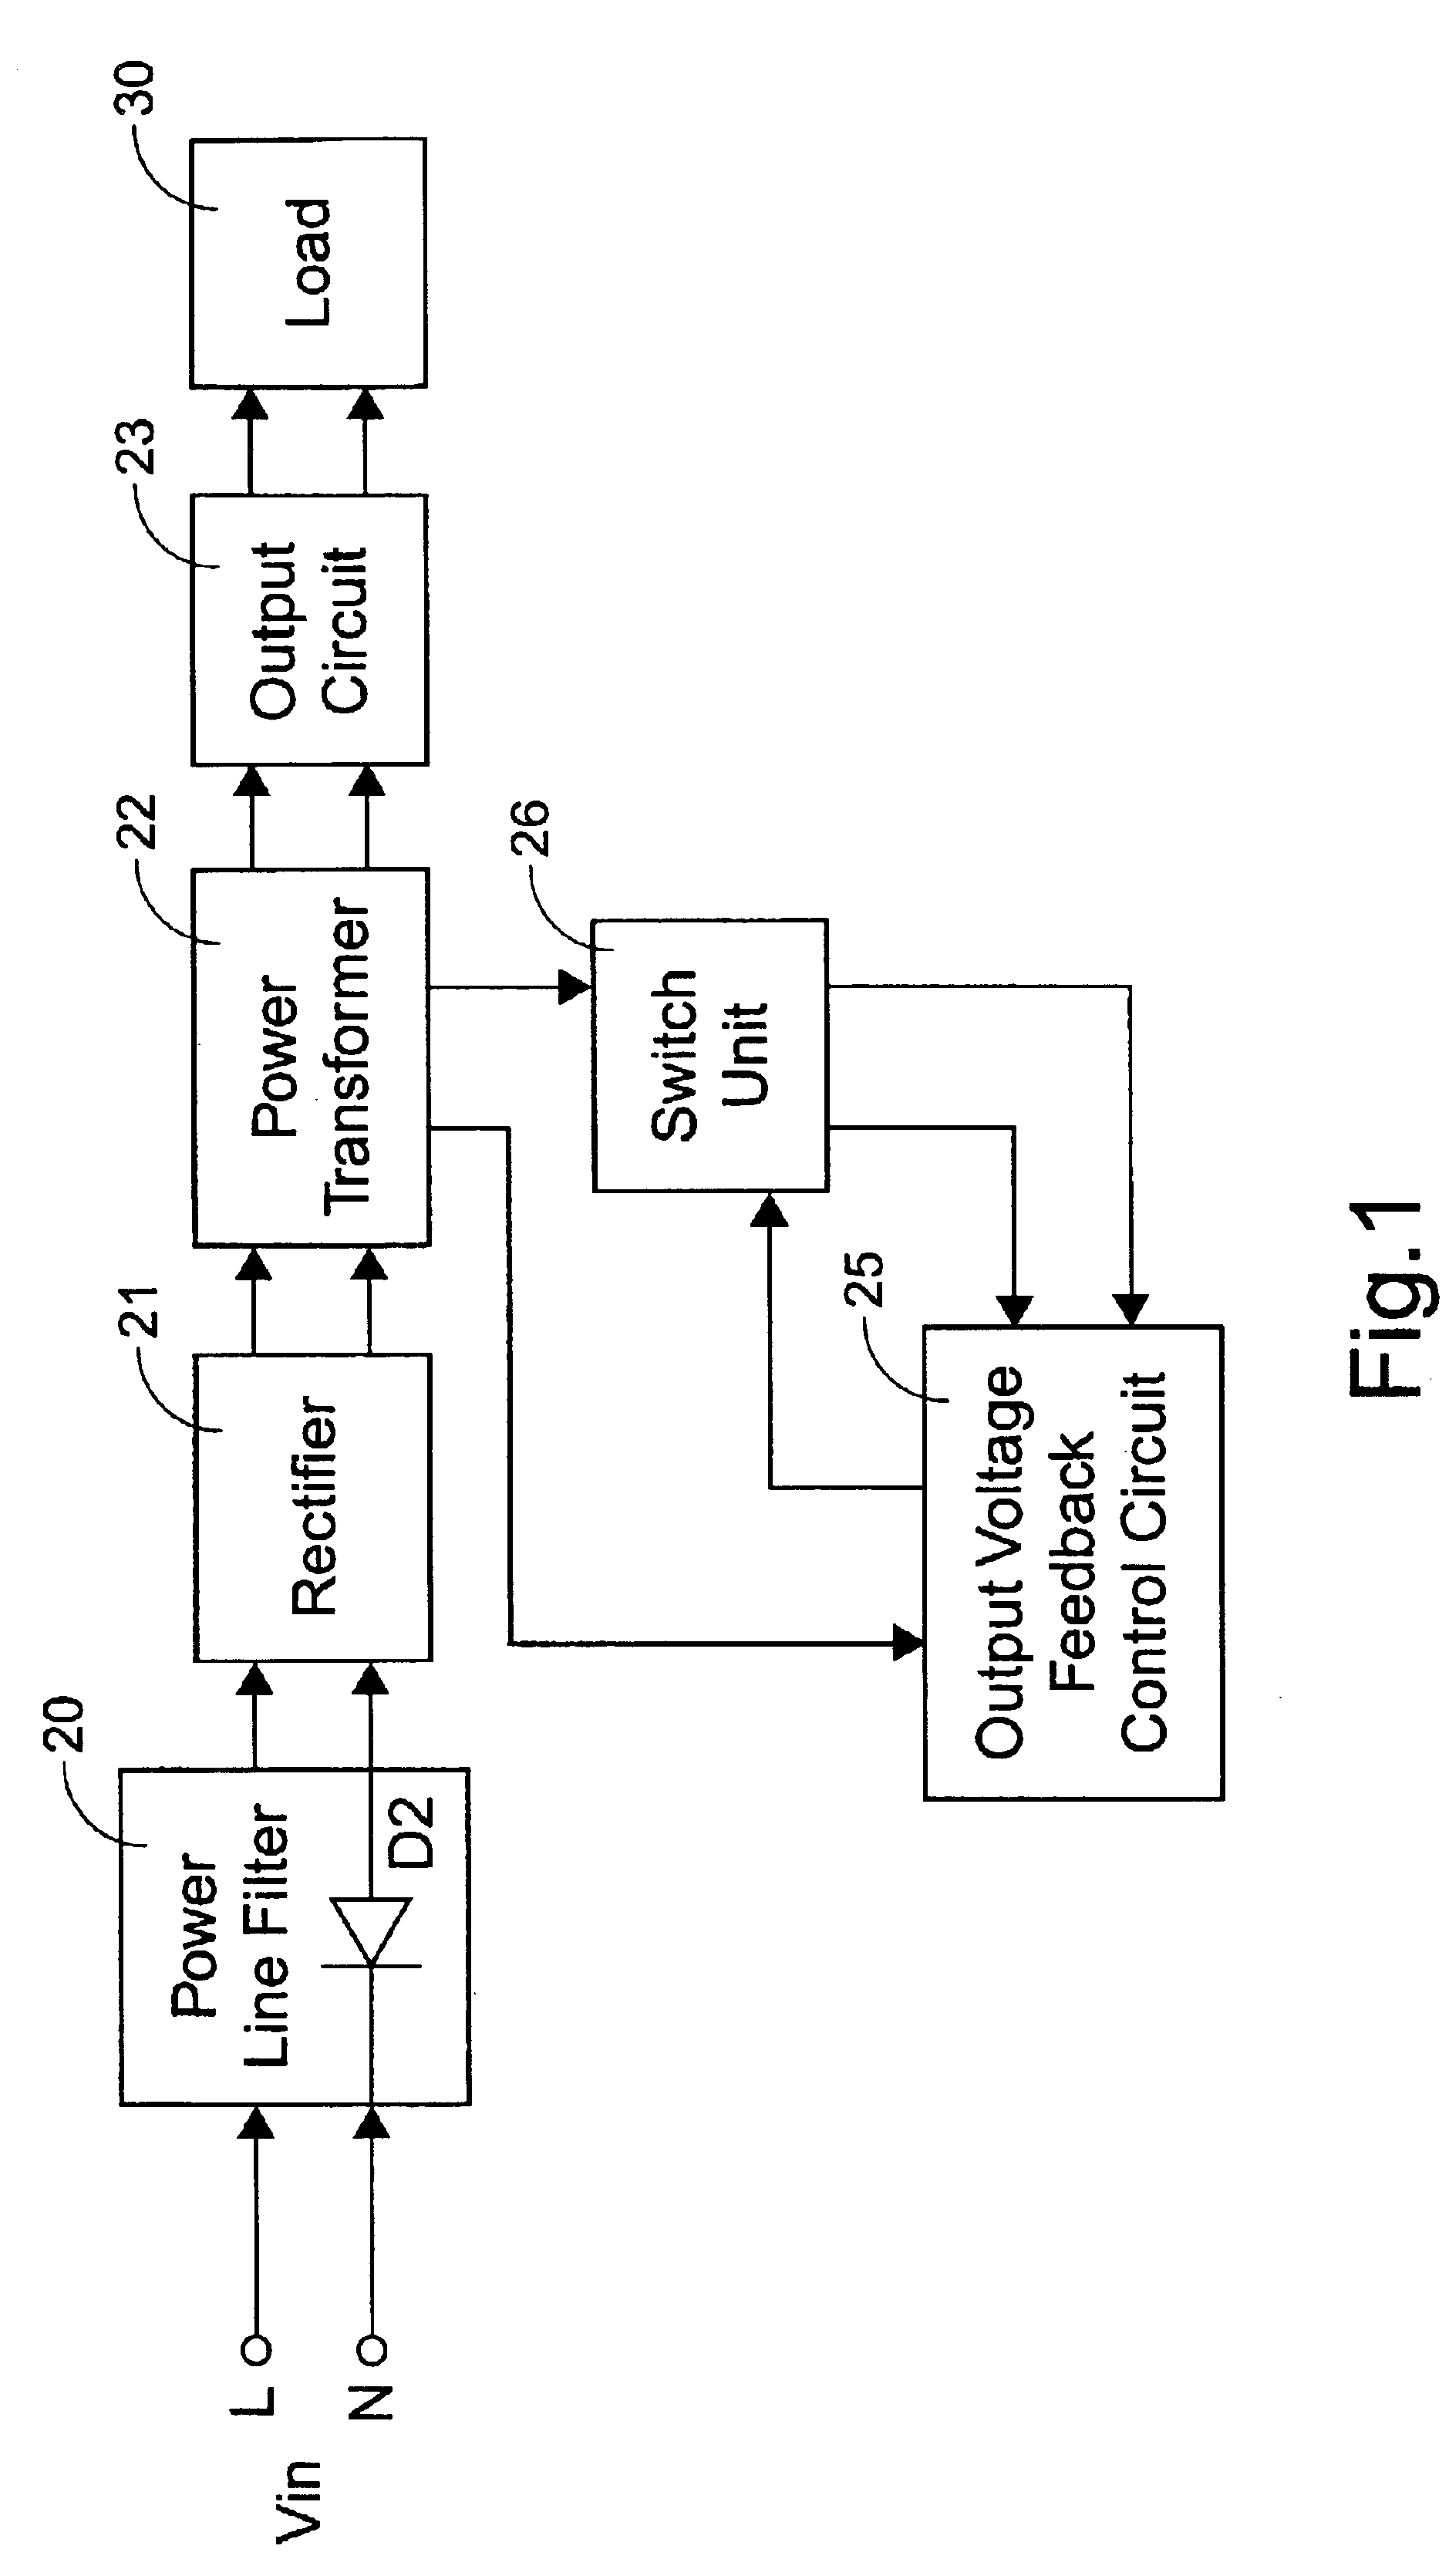 Switching mode power supply incorporating power line filter